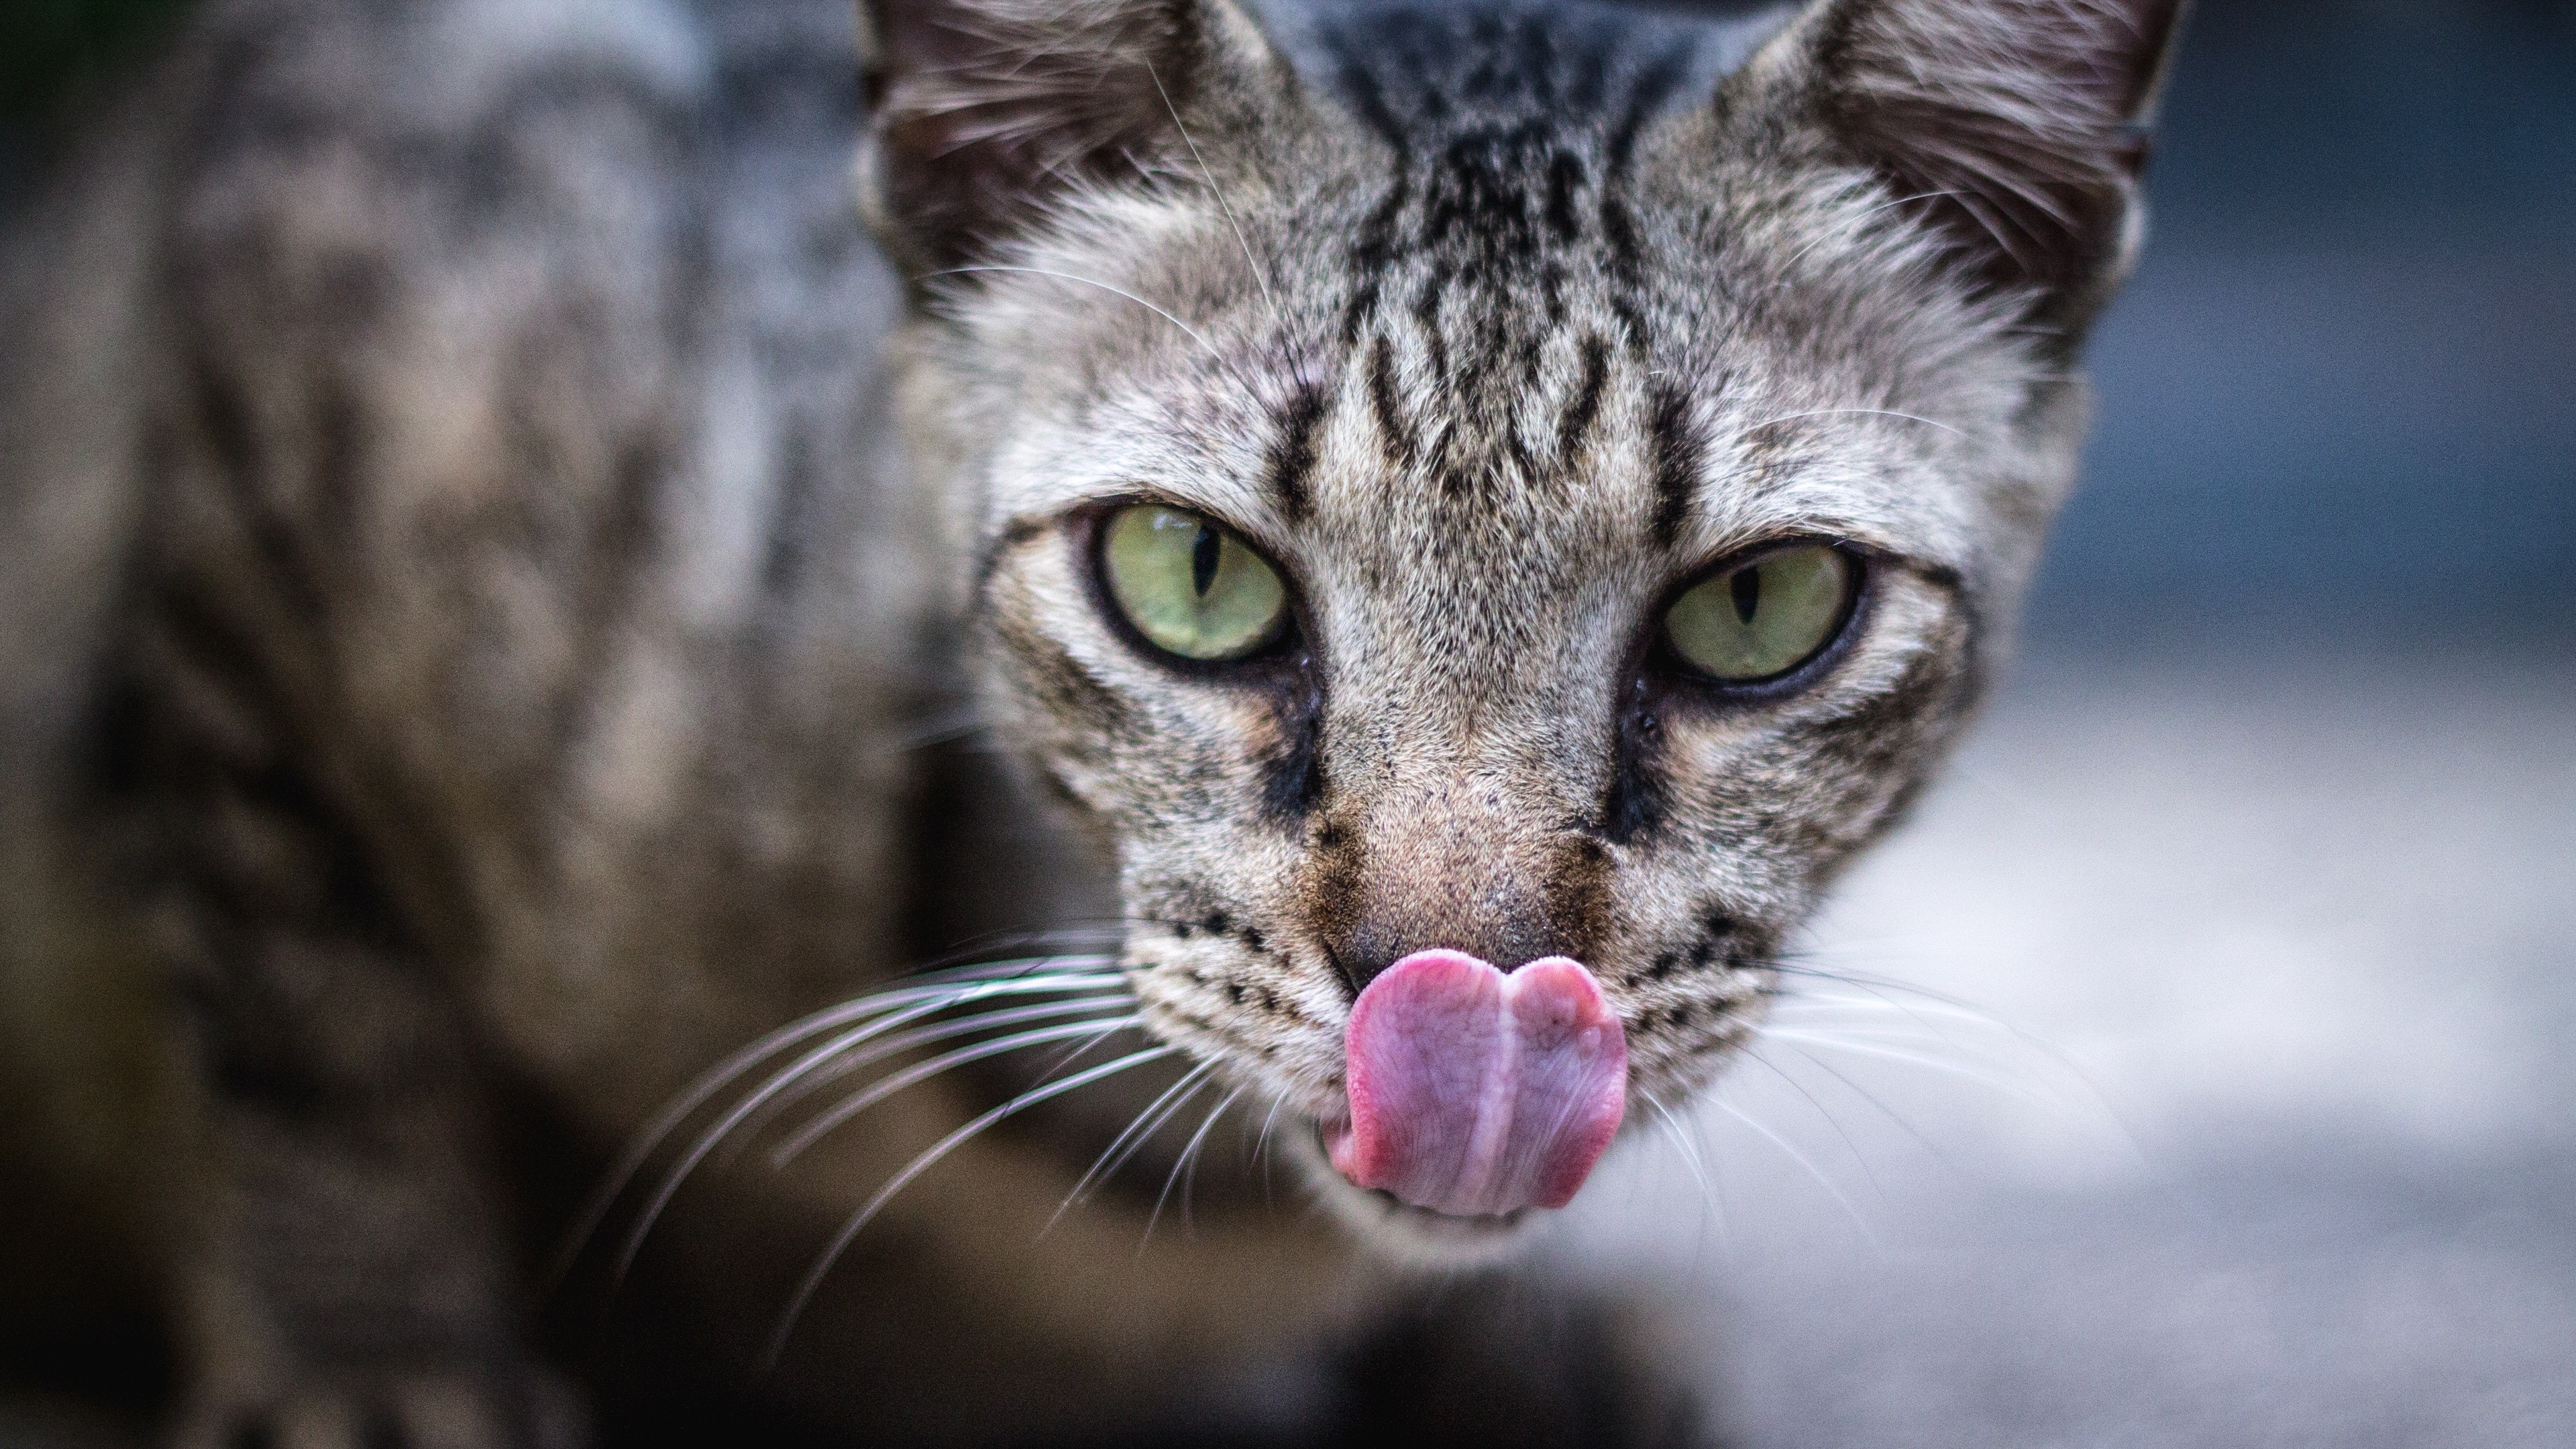 Cat Sticking Out Its Tongue In 4k Wallpaper - Cat Stuck Tongue Out - HD Wallpaper 